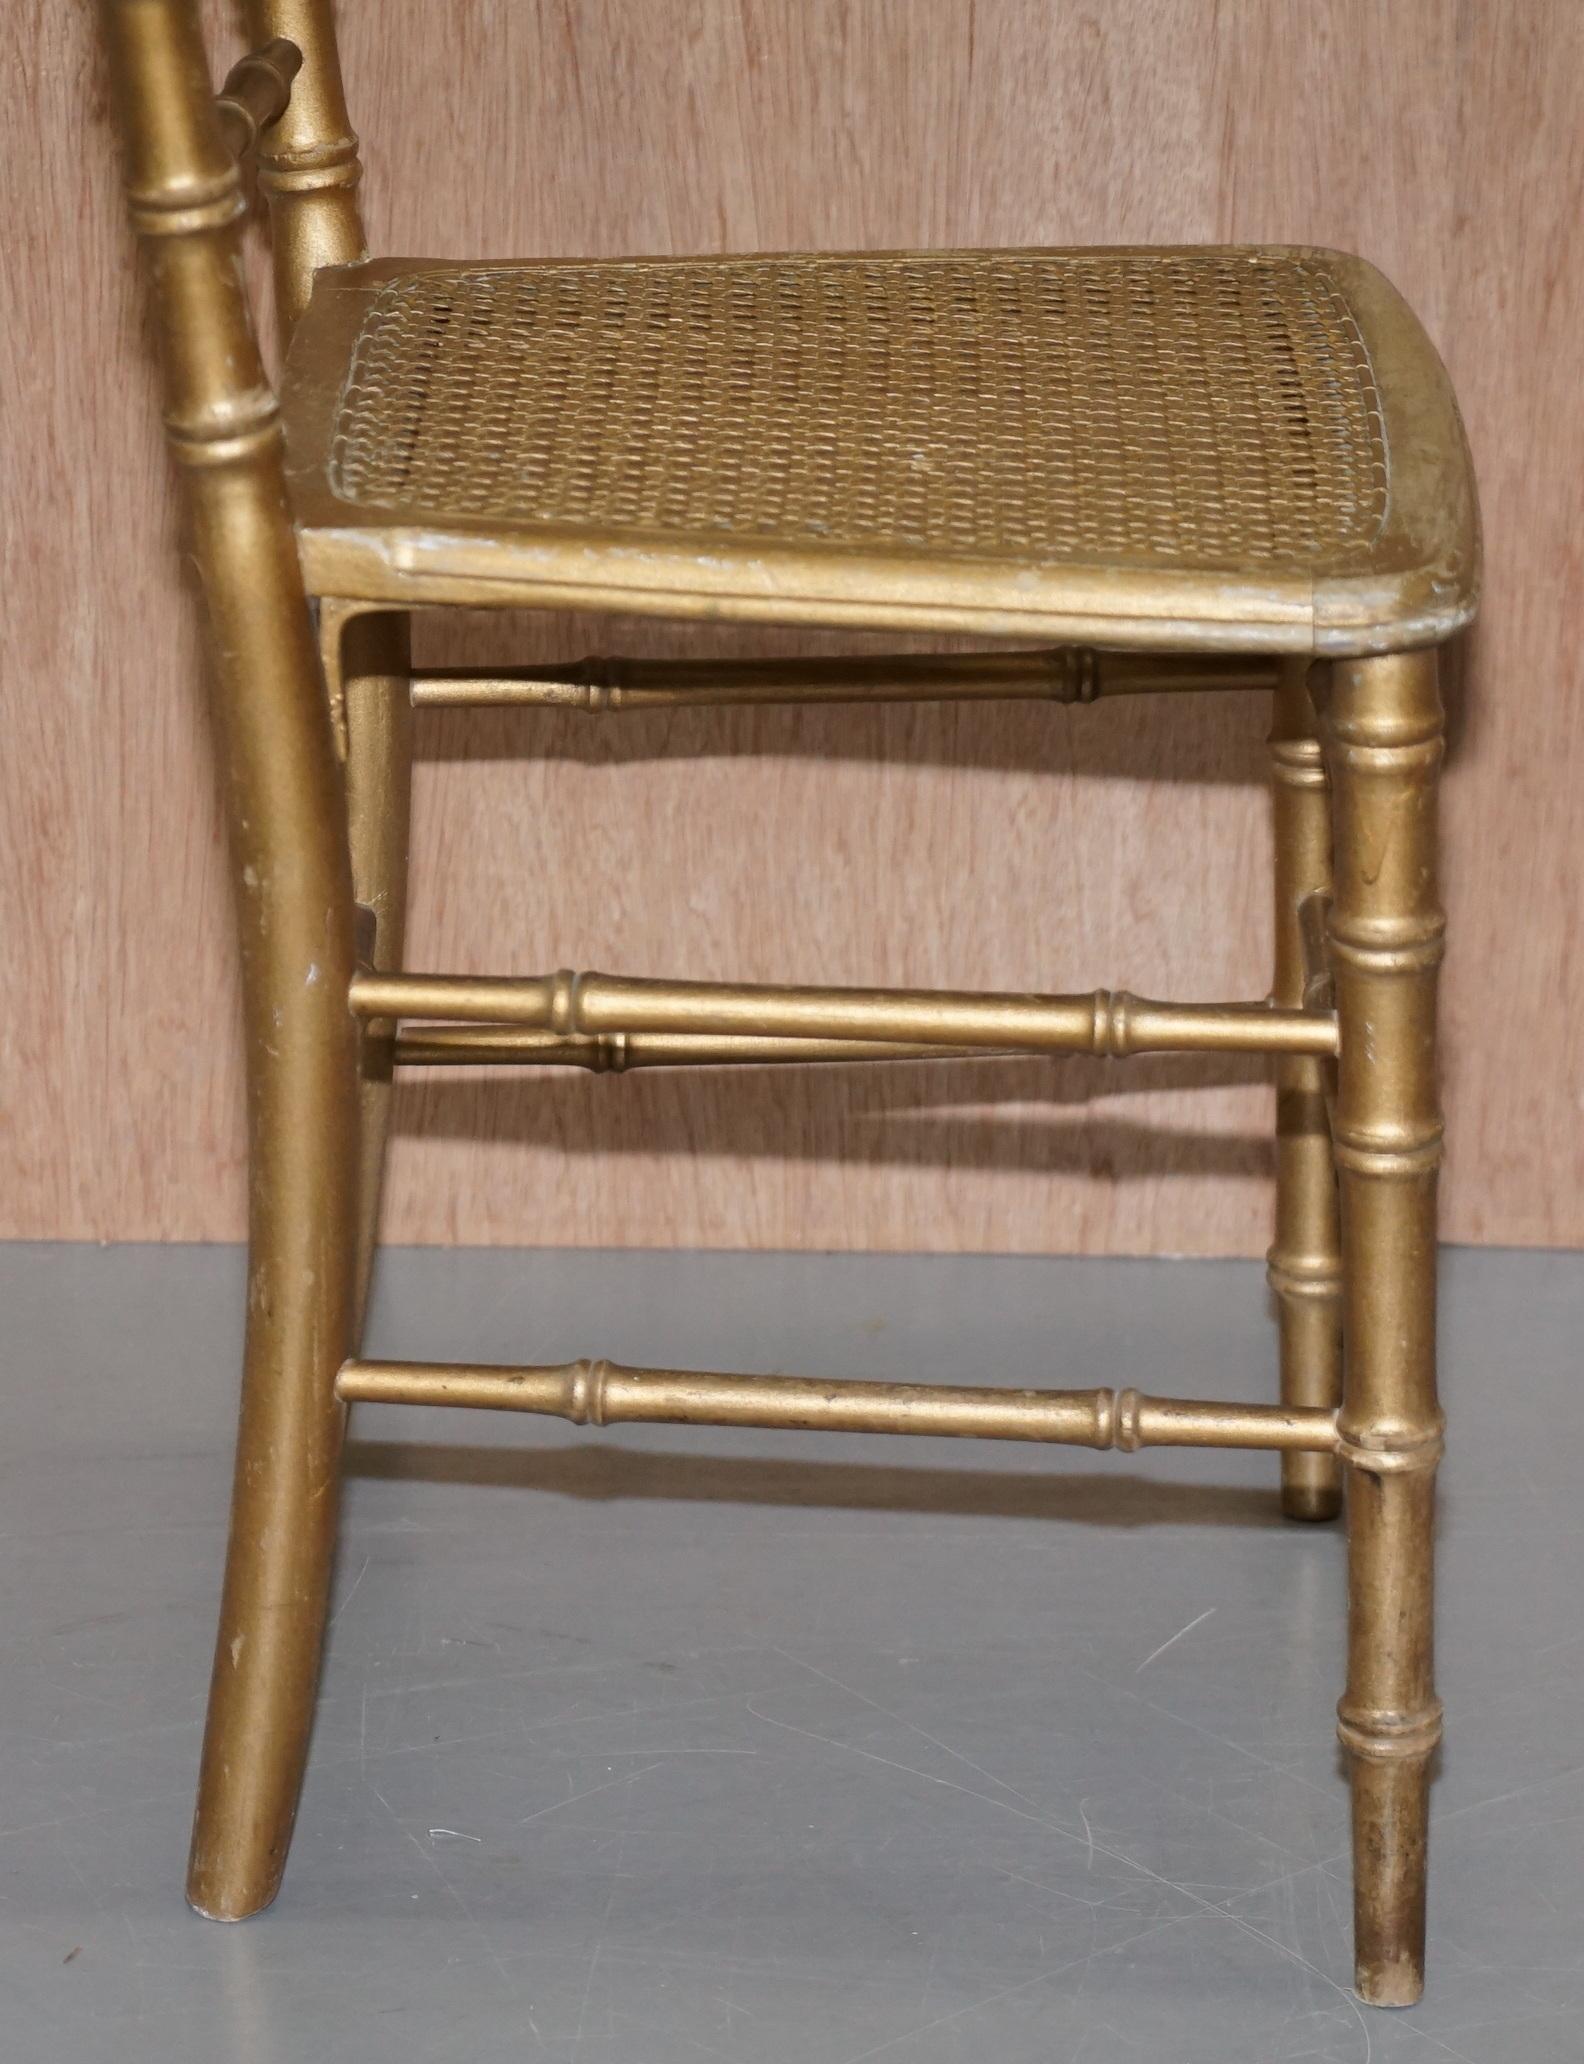 Edwardian Giltwood Famboo Regency Style Berger Chair with Newly Gold Giilt Frame For Sale 3